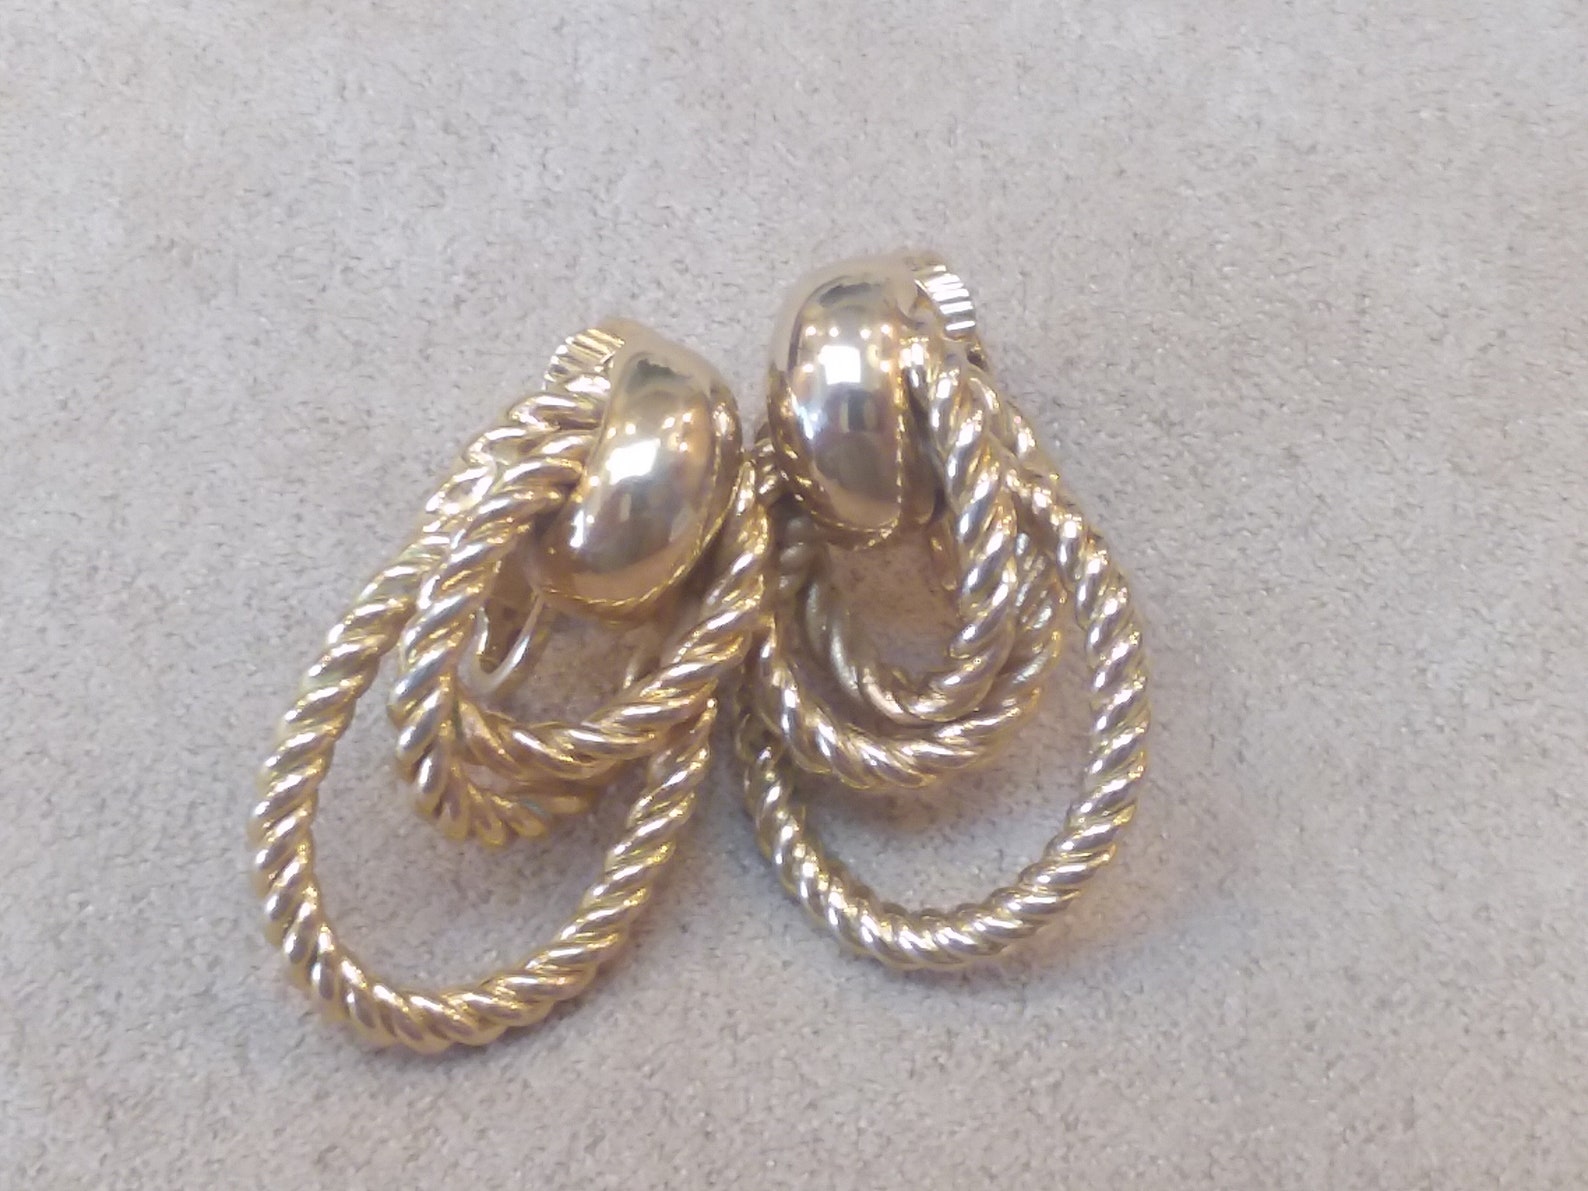 Rare Vintage SARAH COVENTRY Clip on Gold Tone Chain Style EARRINGS ...